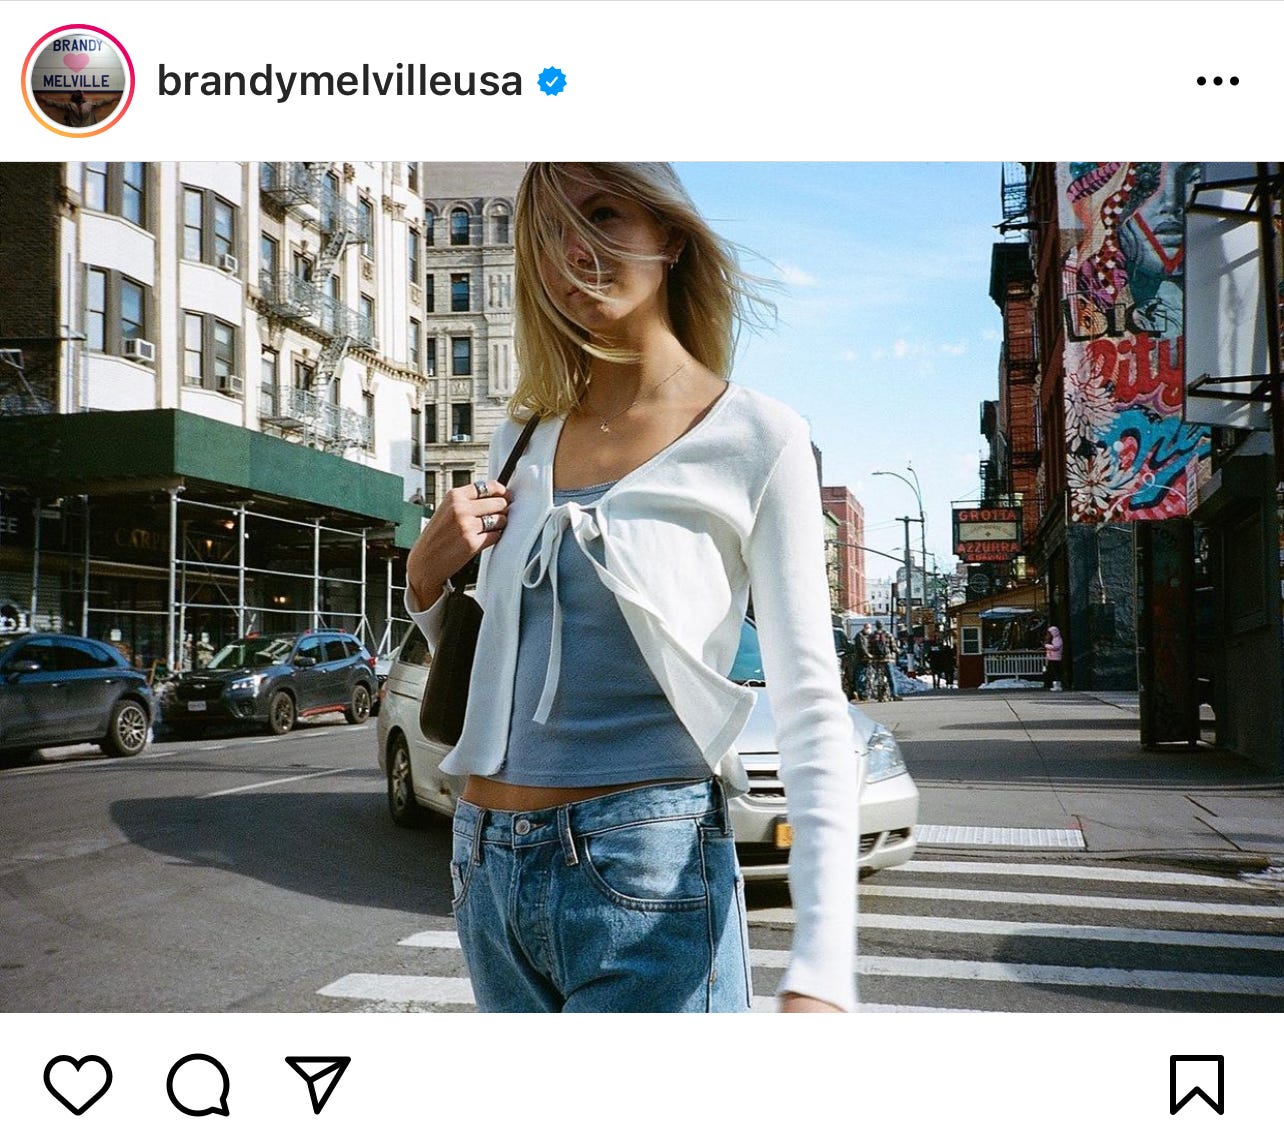 Brandy Melville :the “one size fits all ” brand | by Sweet potato | Digital  Society | Medium